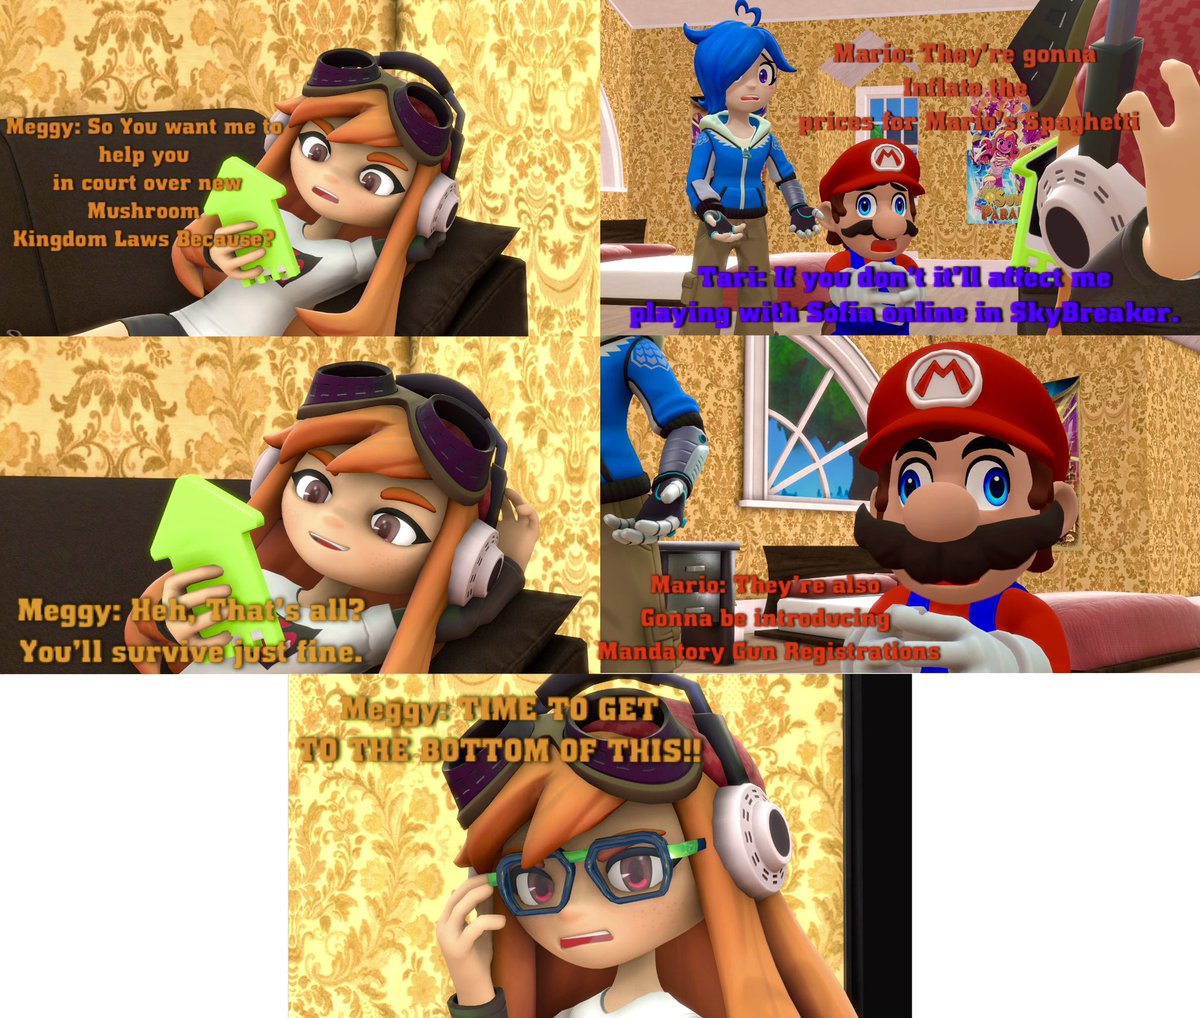 Crazy Laws have been pumping left and right and there’s only one person who can stop it

#smg4 #smg4meggy #meggysmg4 #MeggySpletzer #smg4tari #tarismg4